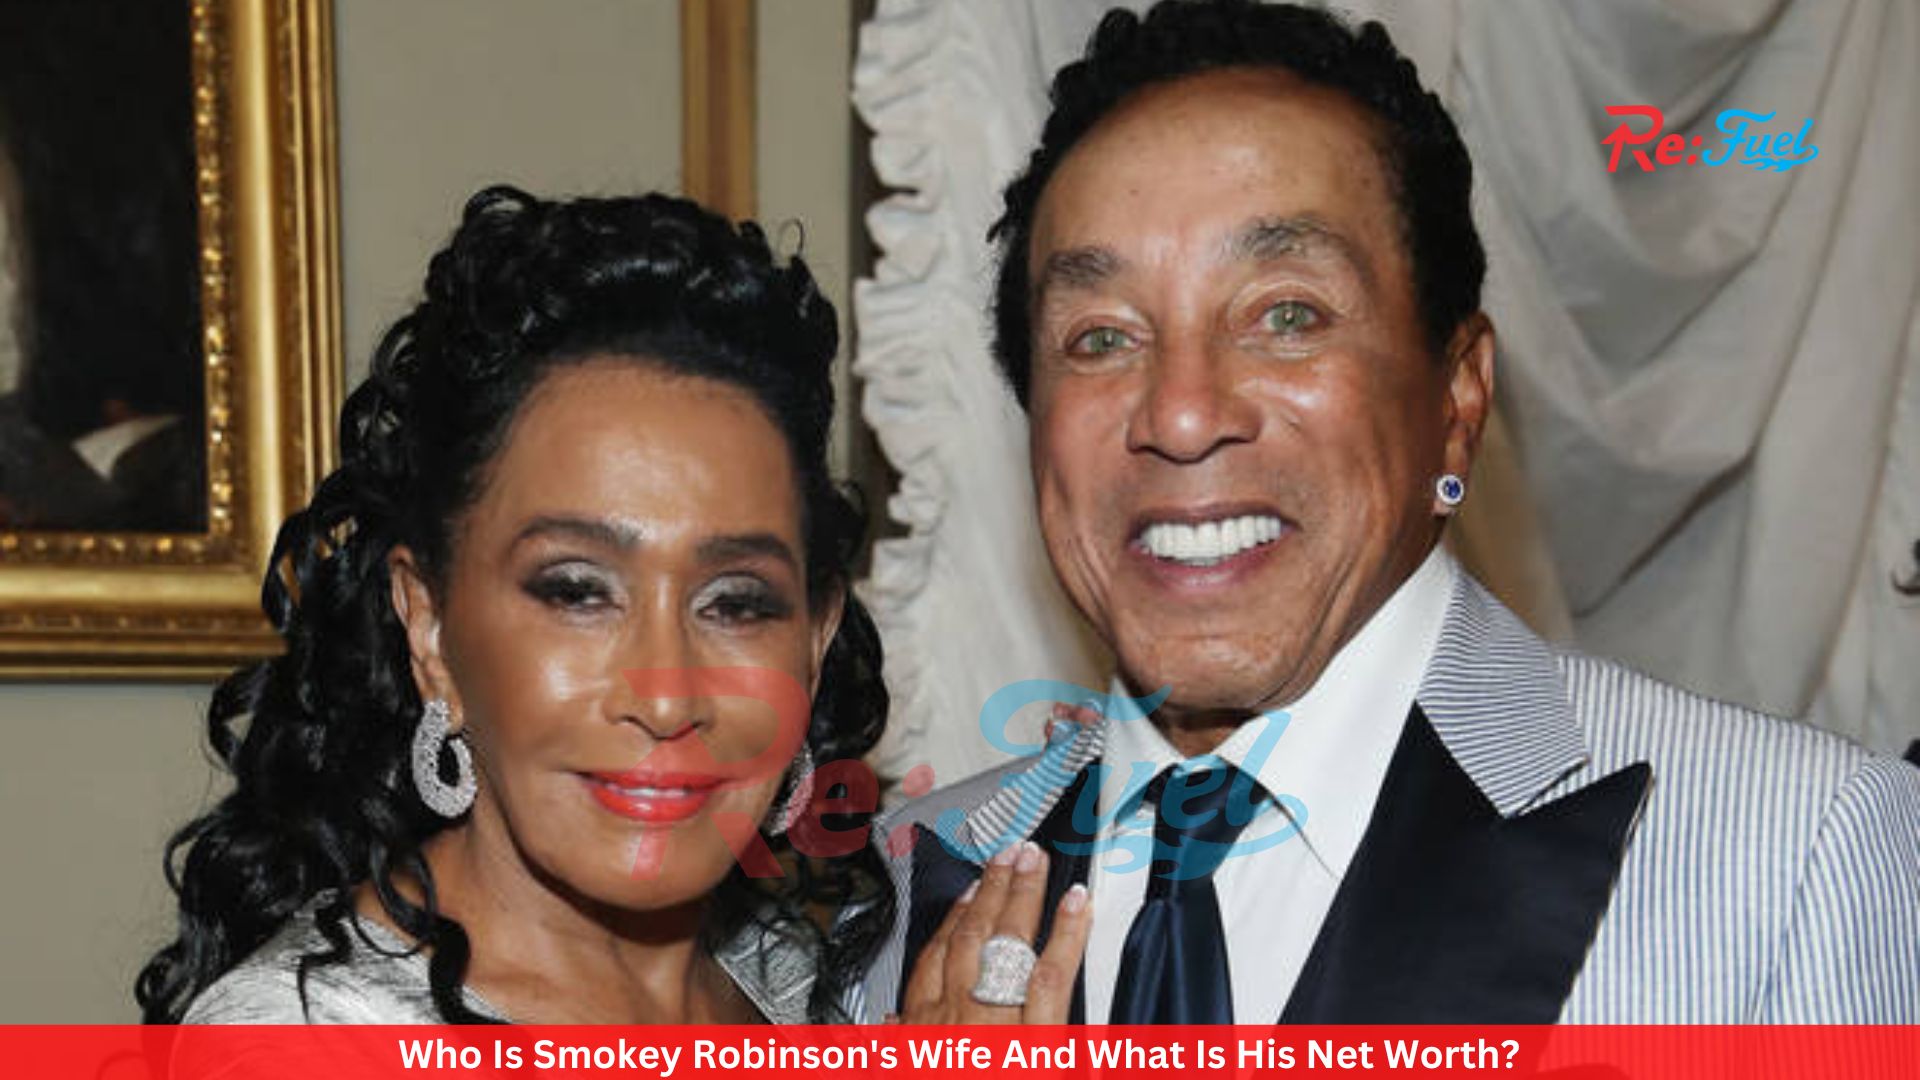 Who Is Smokey Robinson's Wife And What Is His Net Worth?